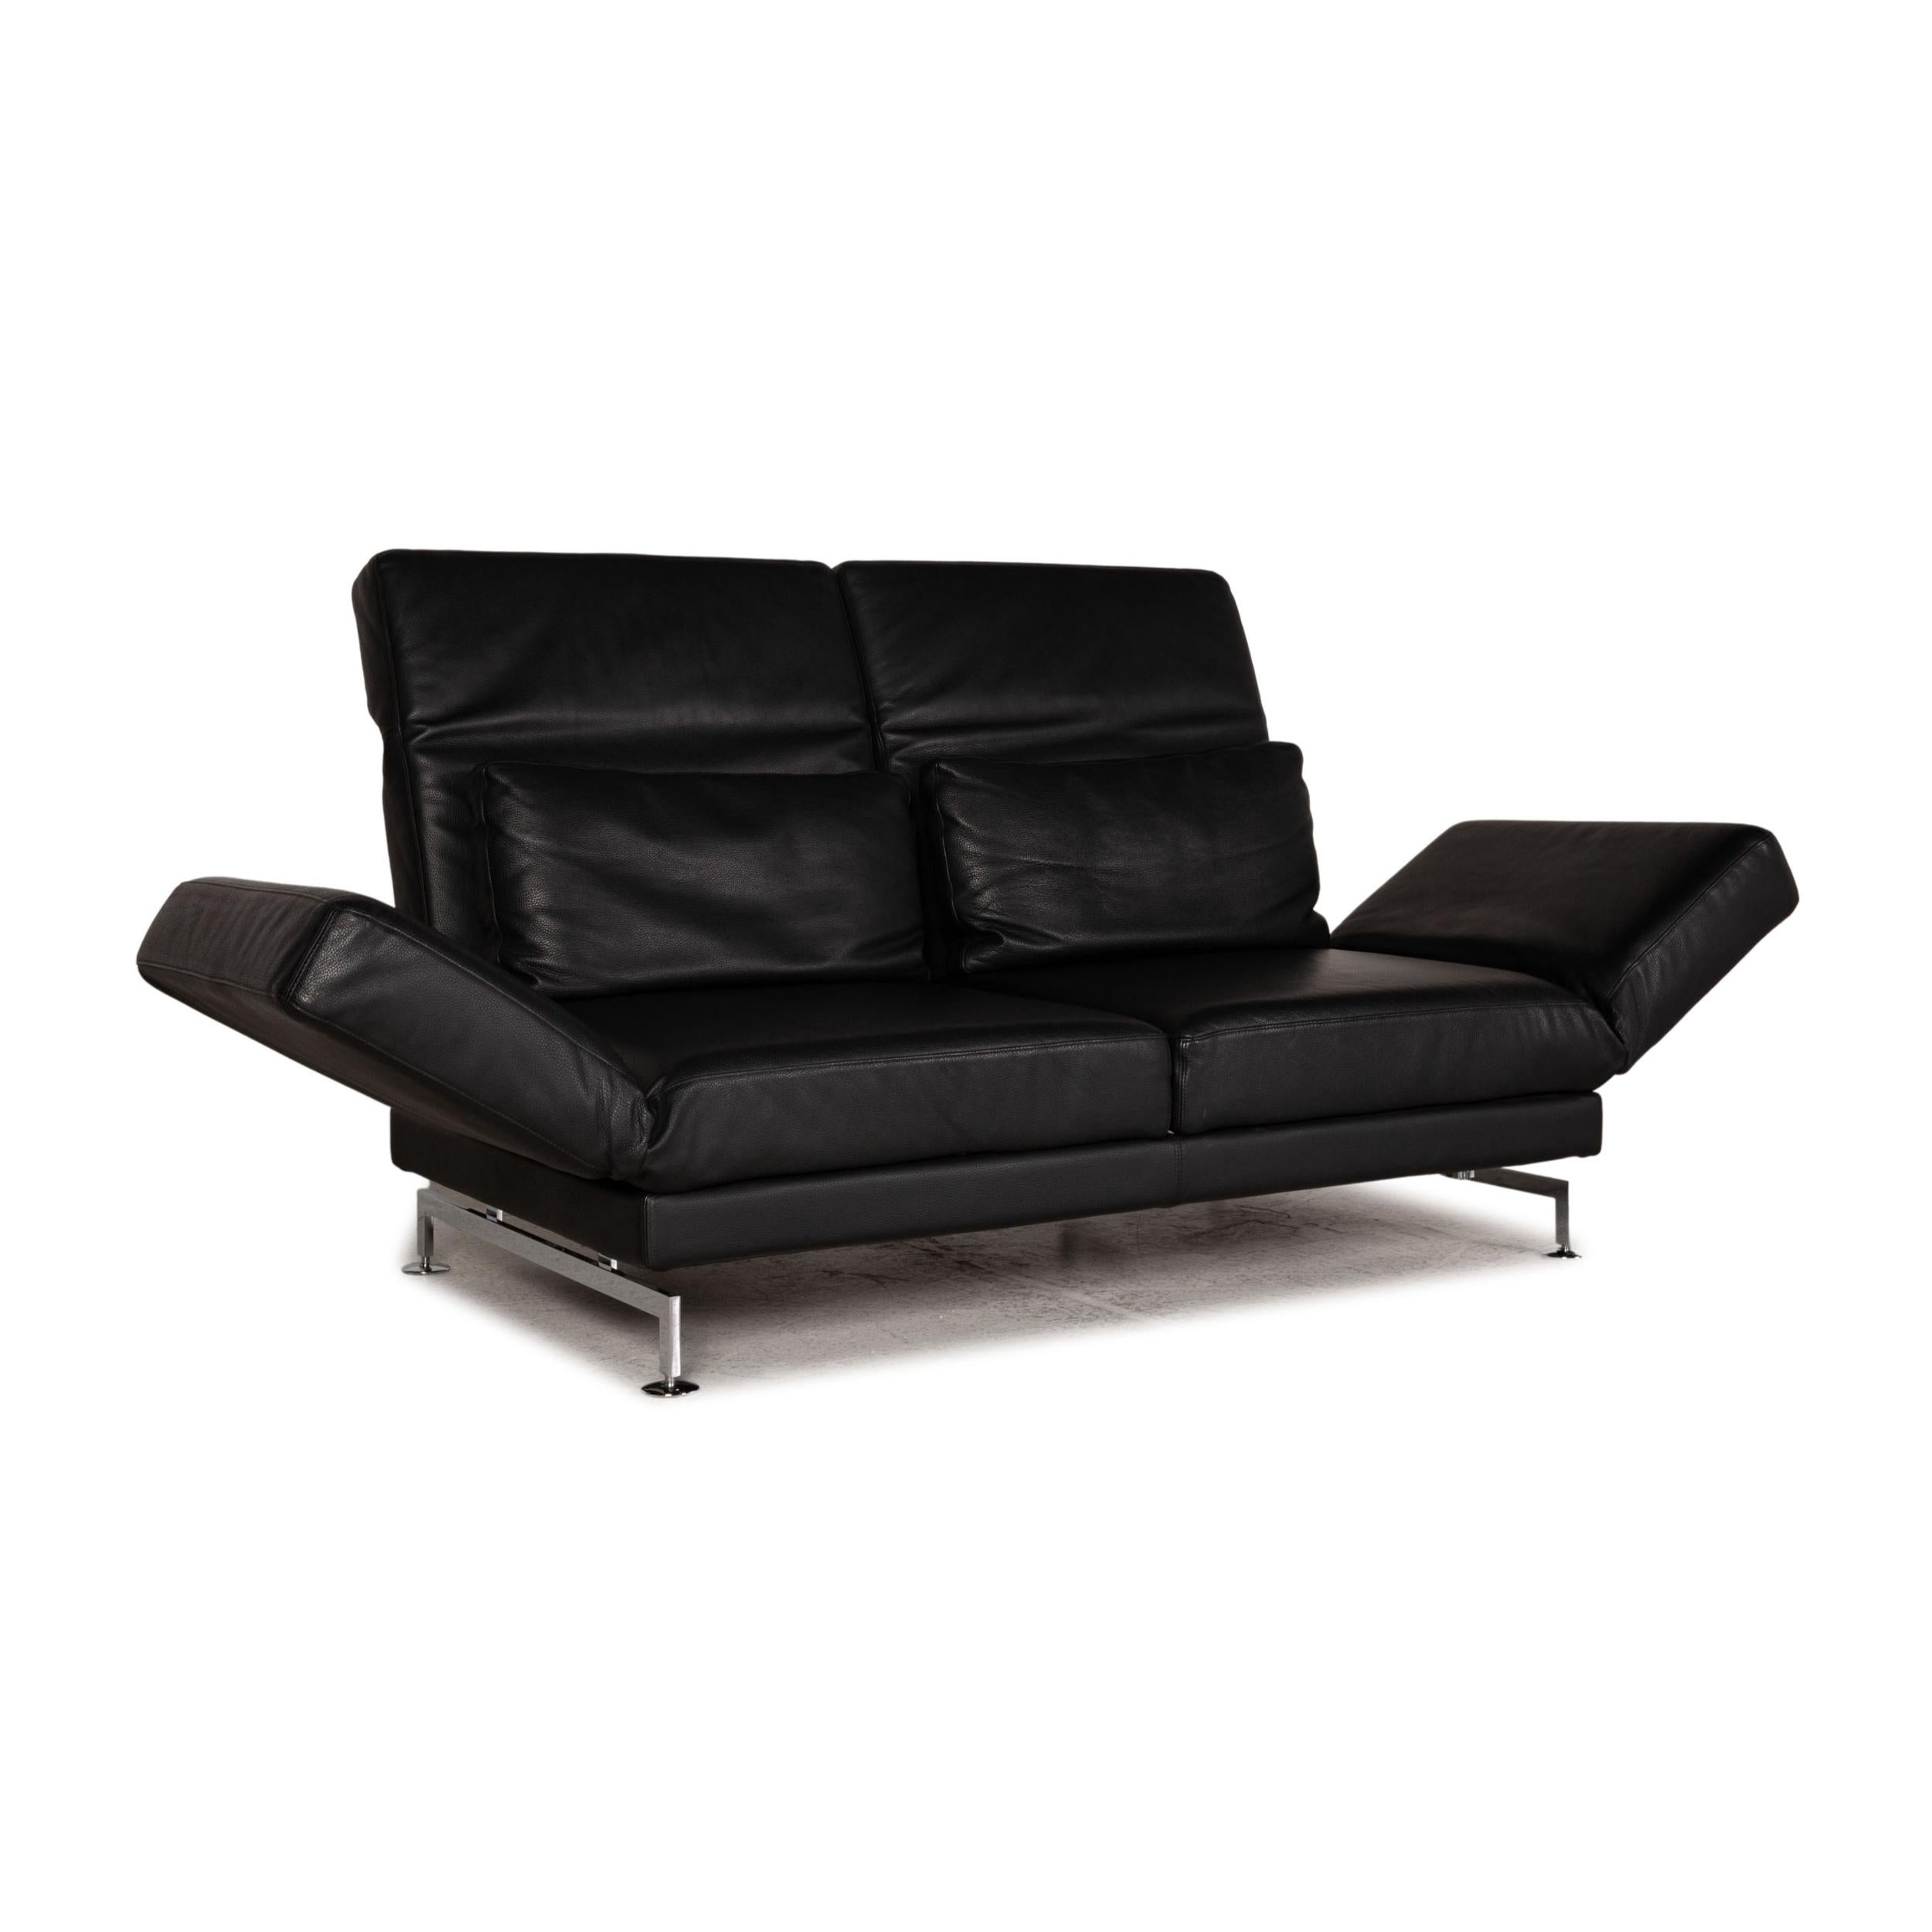 Contemporary Brühl & Sippold Moule Leather Sofa Black Two-Seater Couch Function Sleeping For Sale